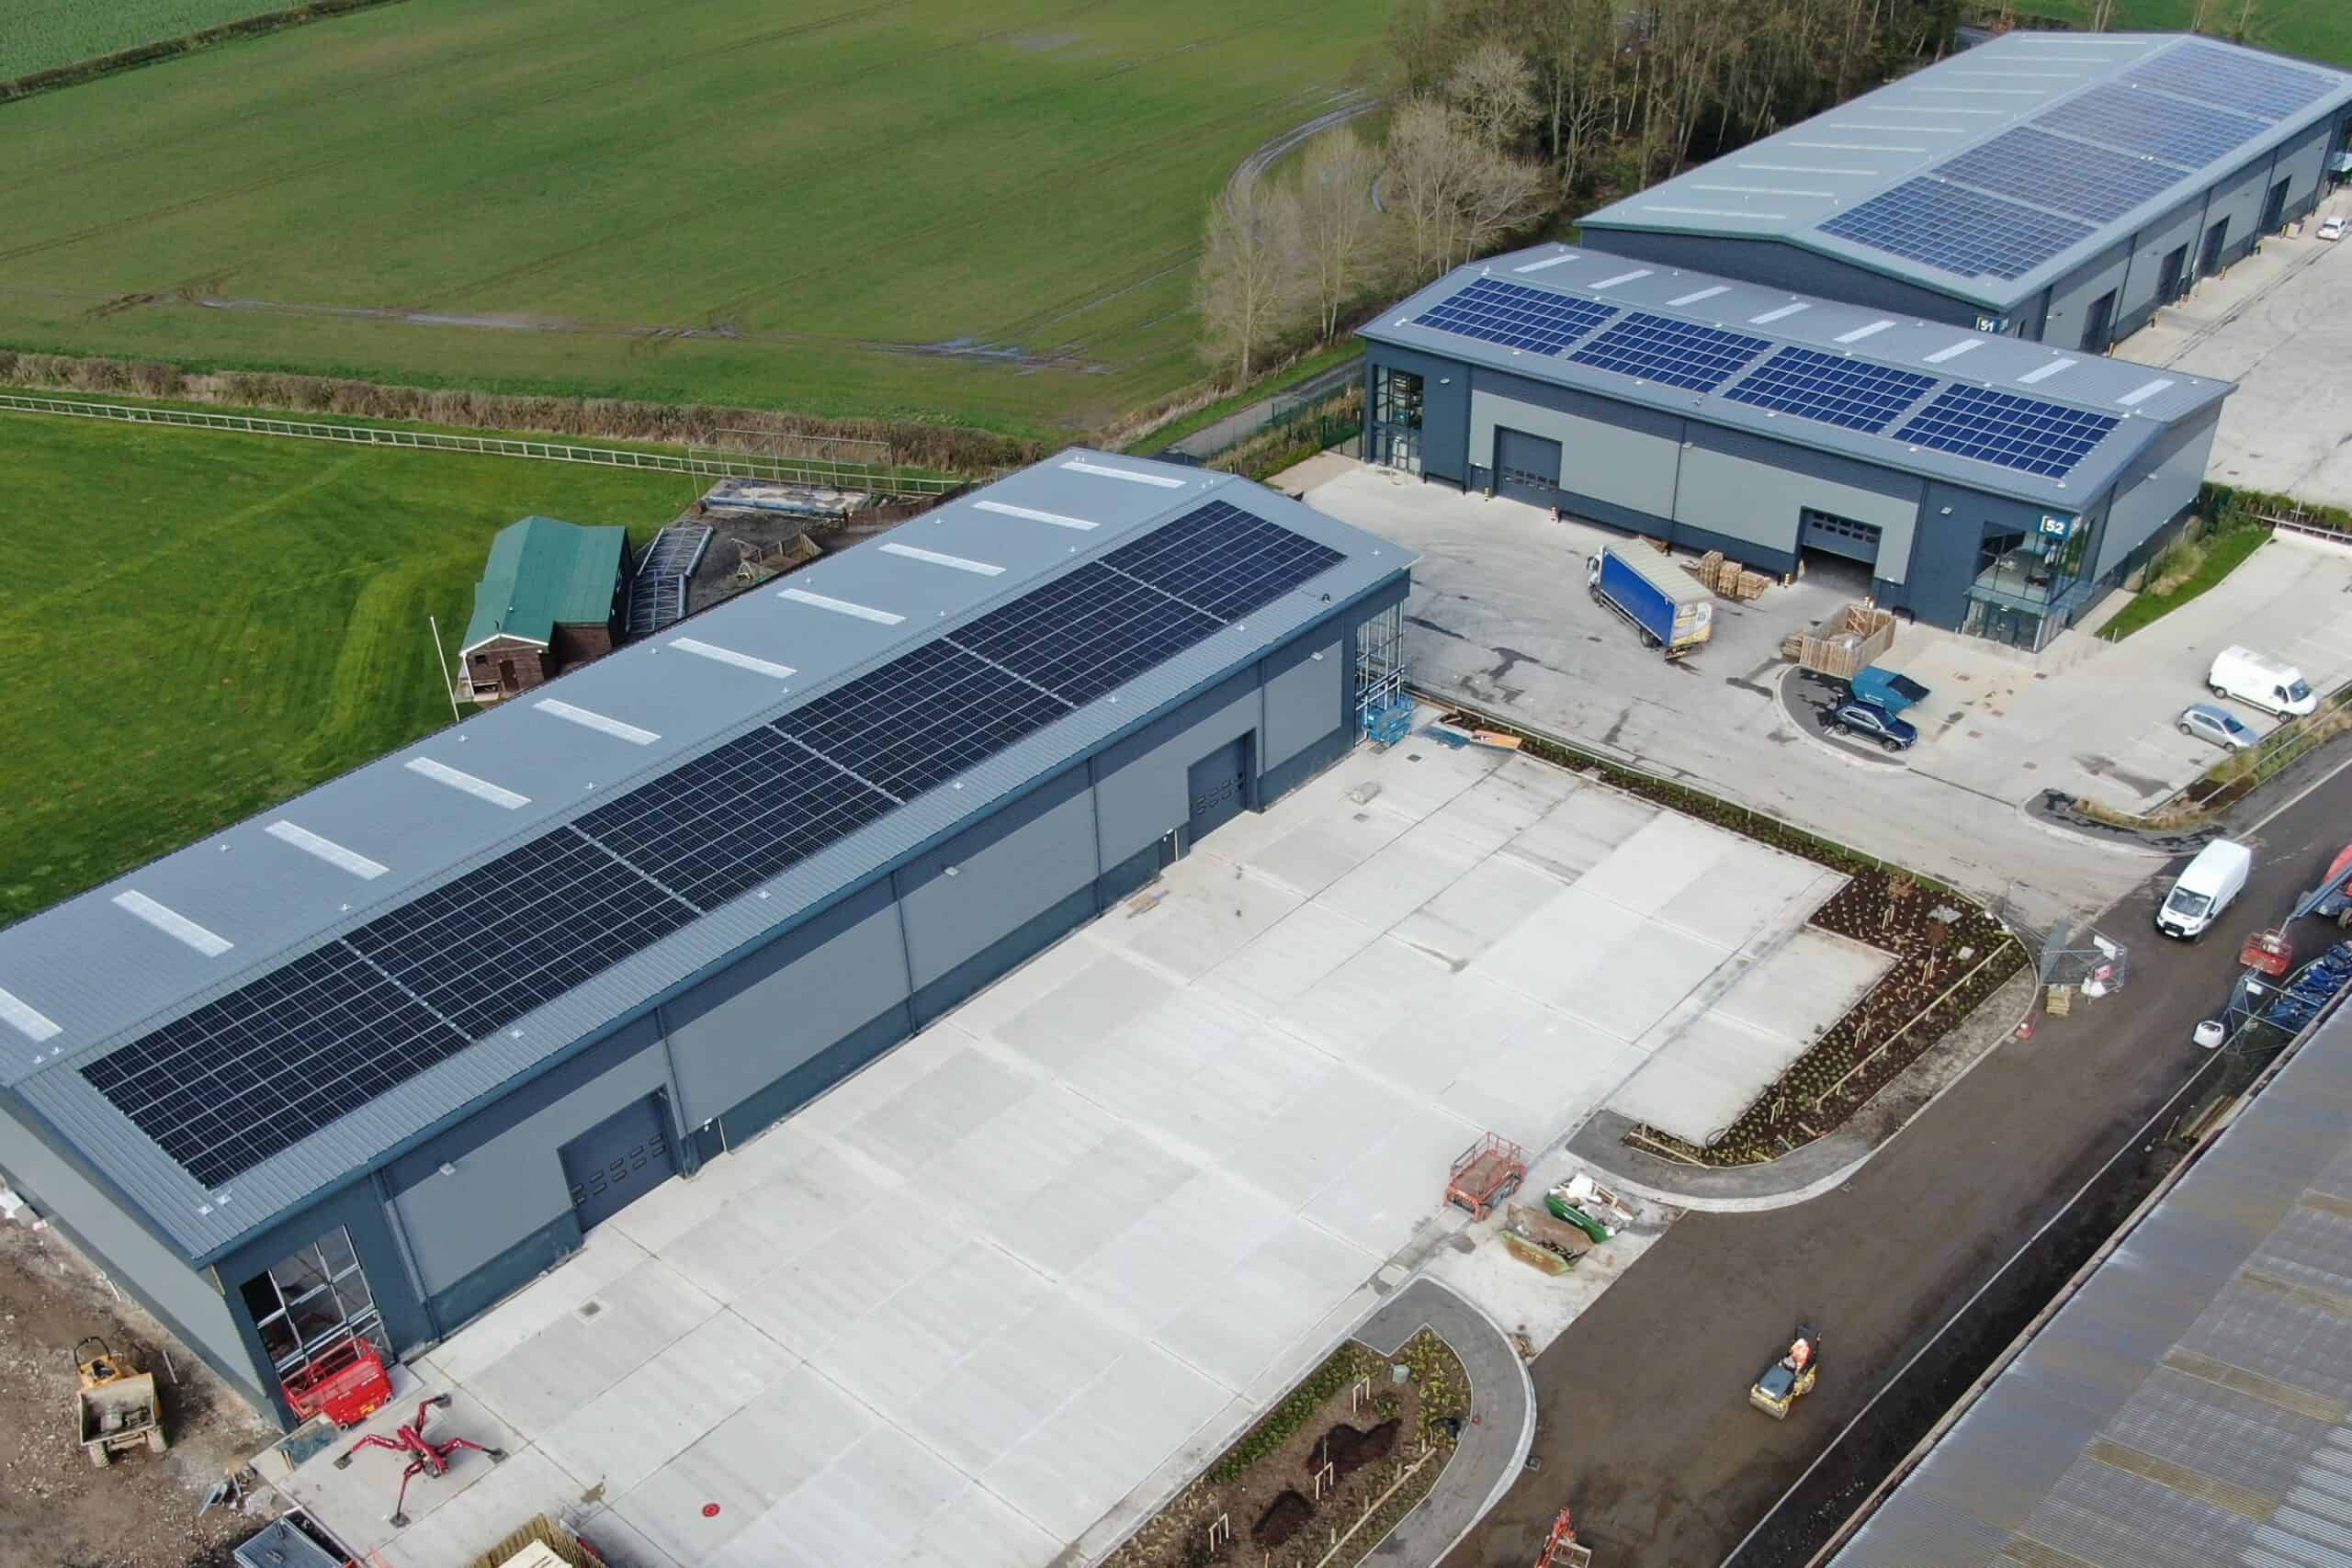 Potter Space Business Park, Ripon, already has solar panels in place on its warehouses. Image courtesy of Potter Space/UKWA